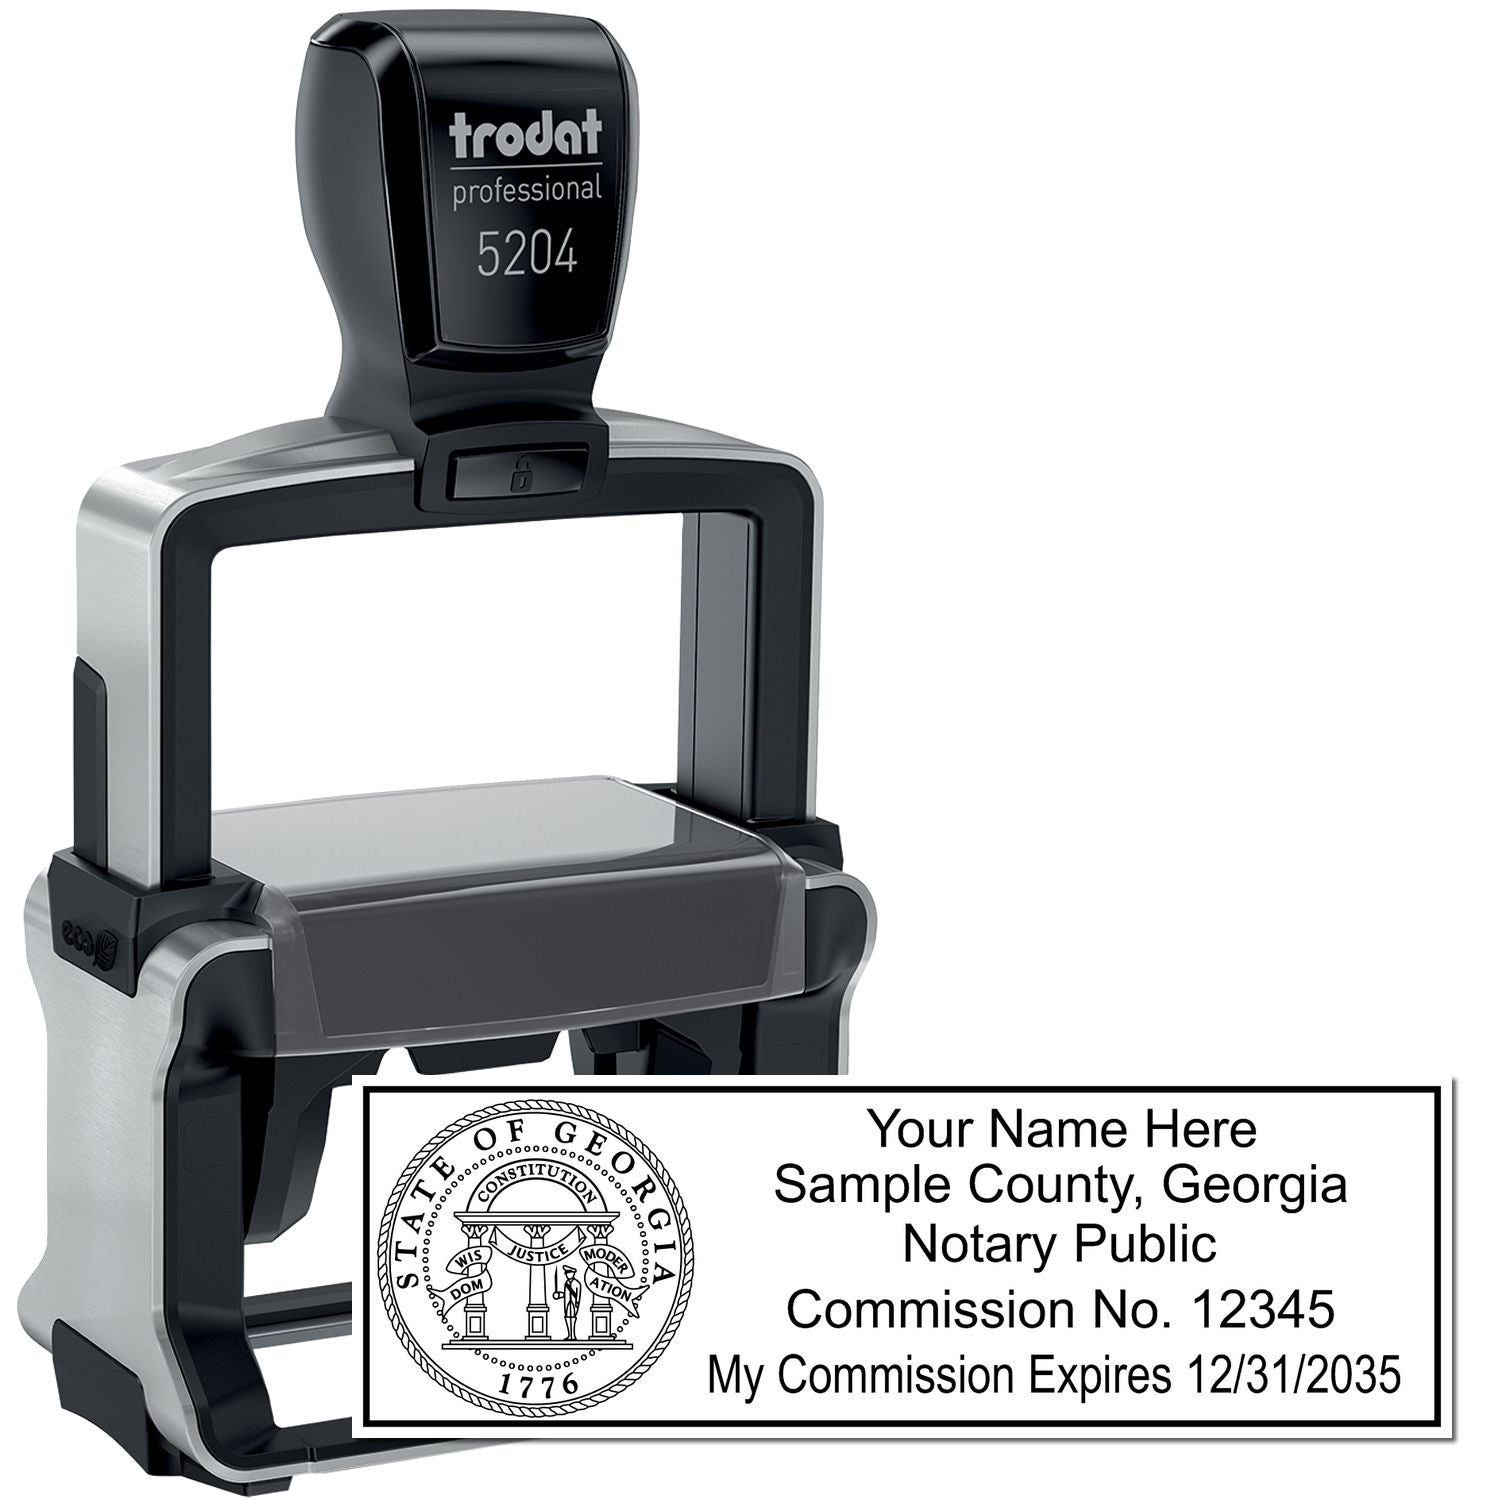 The main image for the Heavy-Duty Georgia Rectangular Notary Stamp depicting a sample of the imprint and electronic files